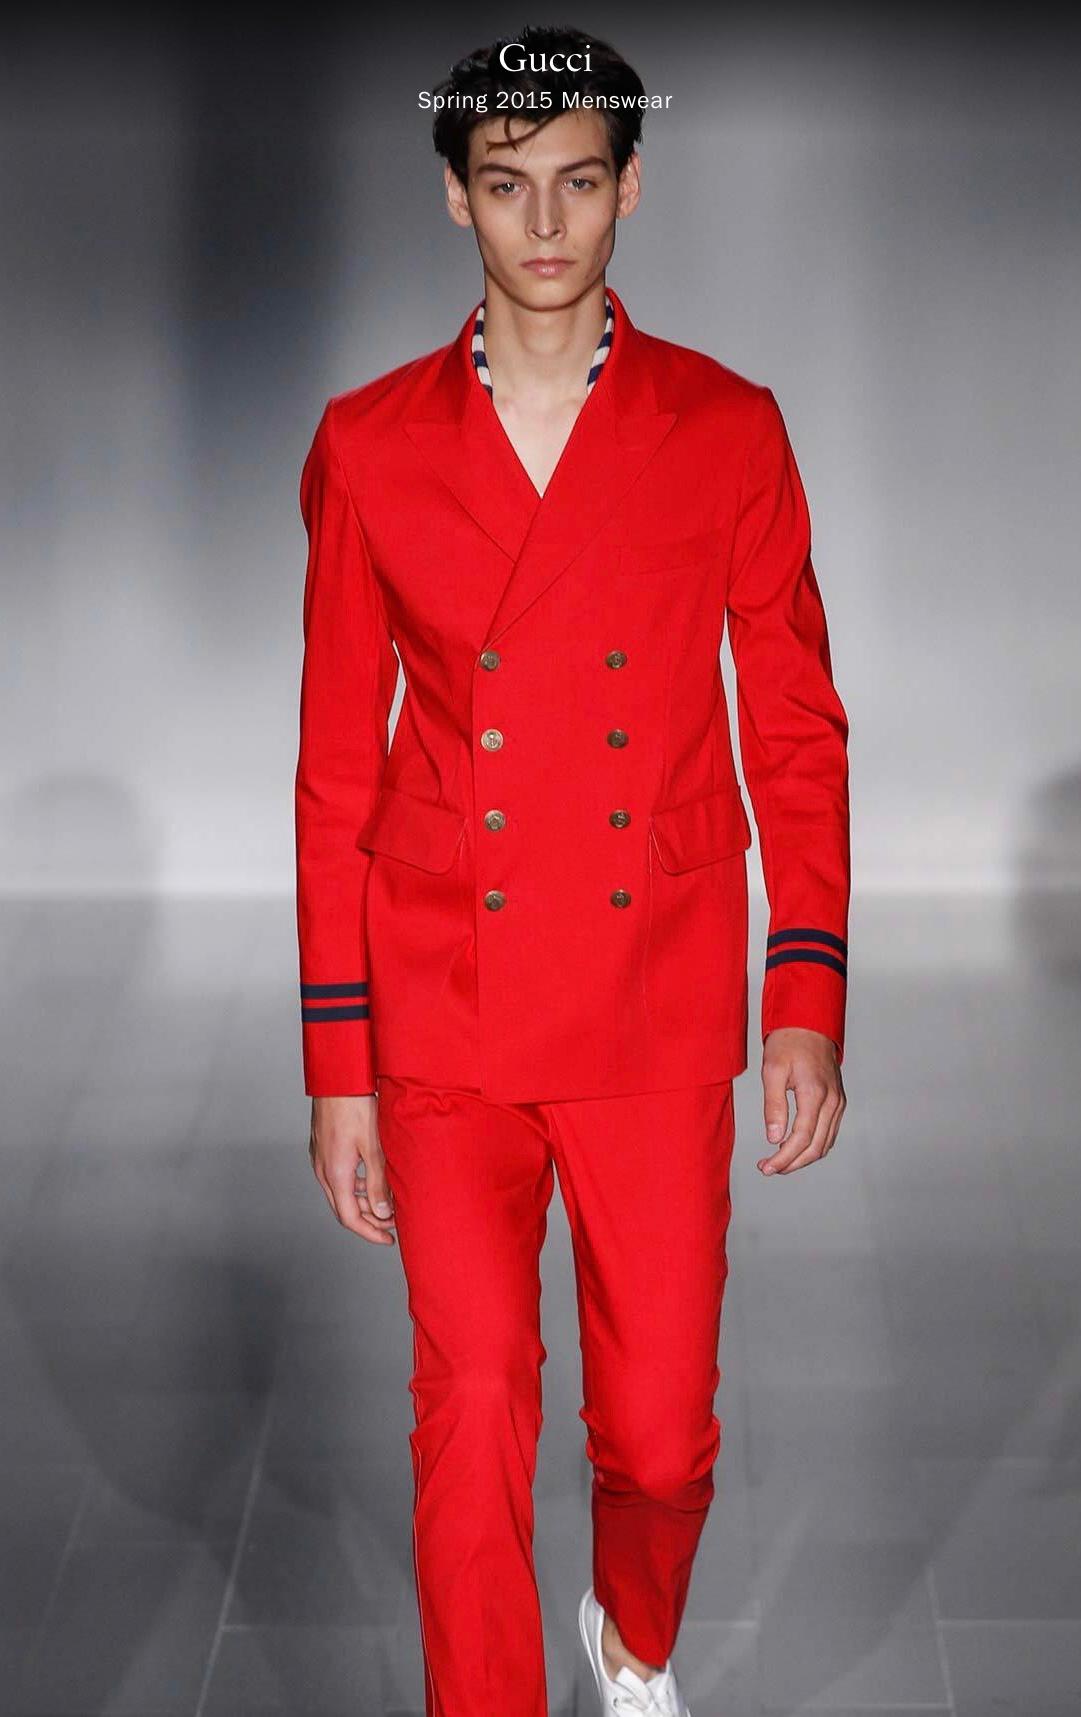 Women's or Men's Gucci SS 2015 sartorial jacket For Sale